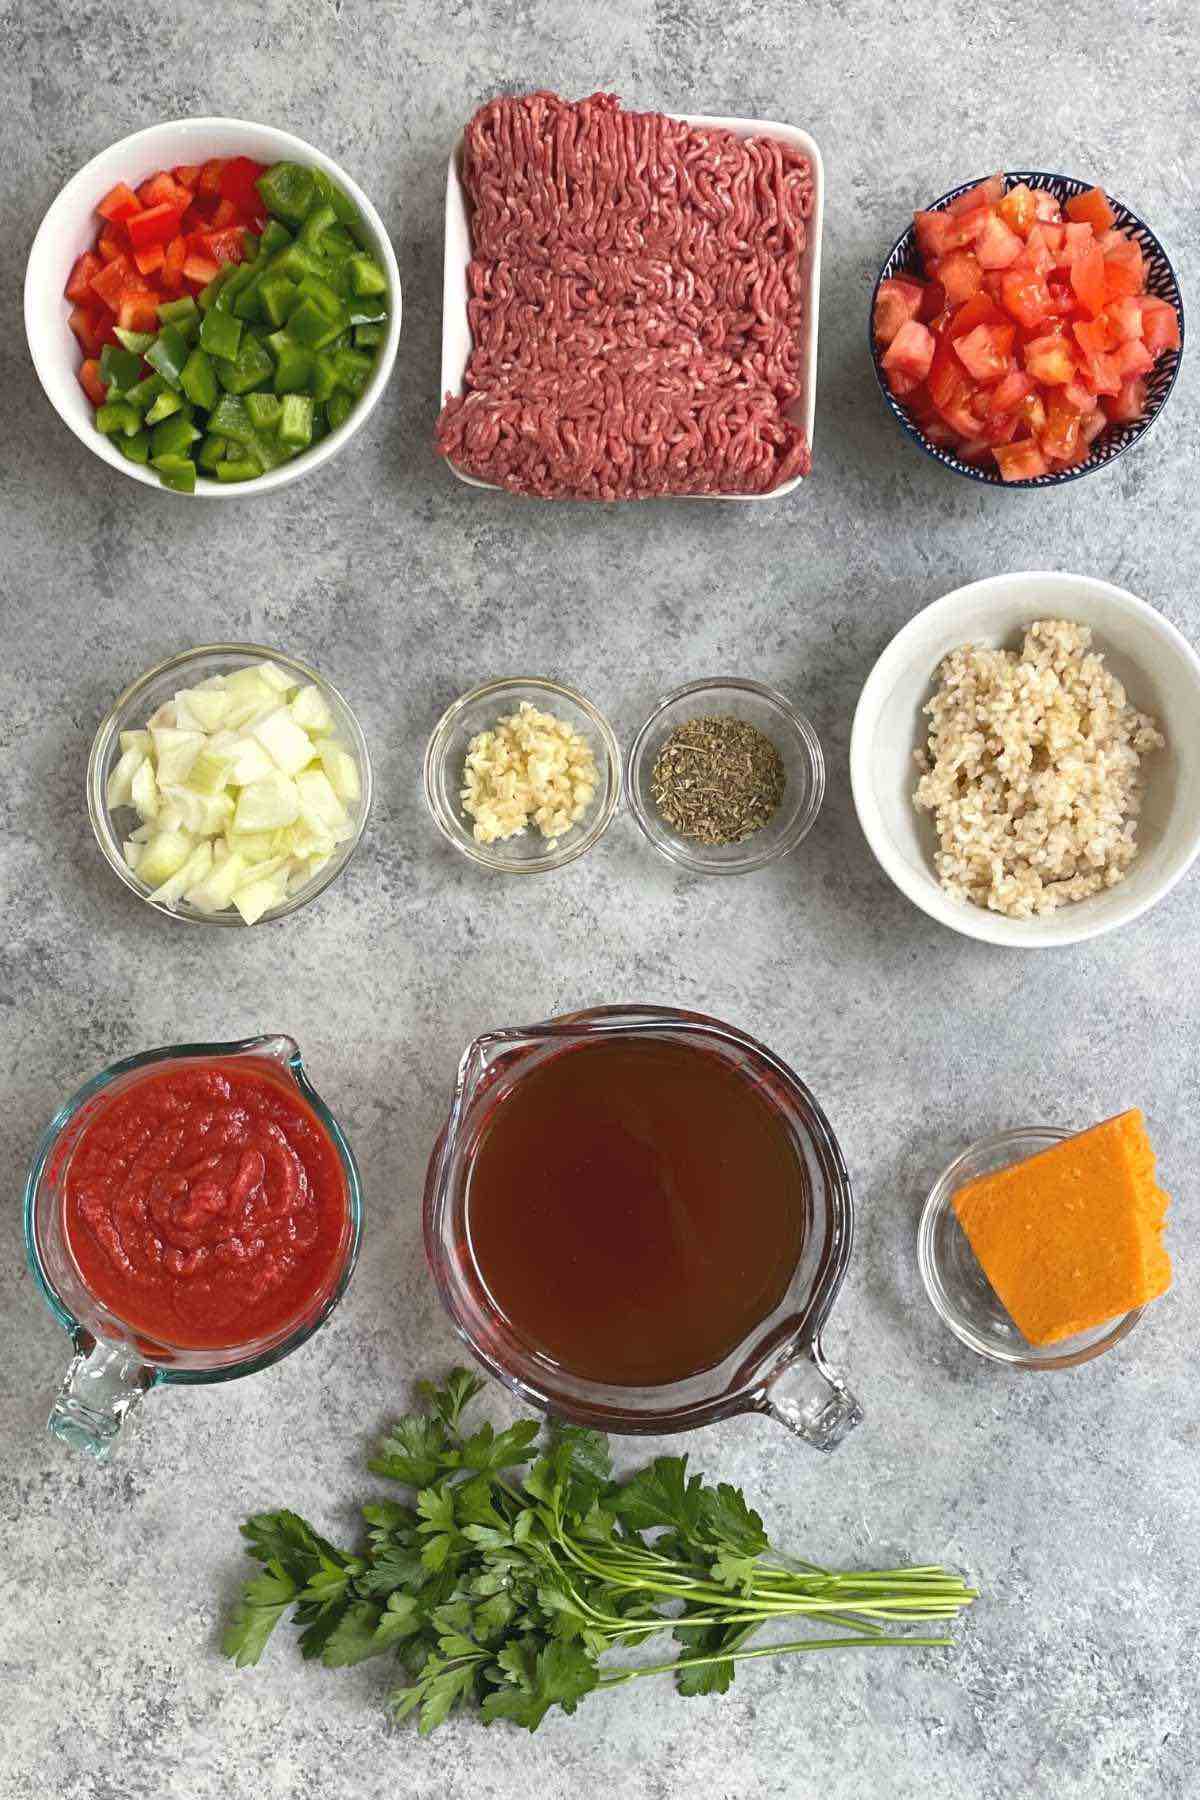 Ingredients for slow cooker stuffed pepper soup